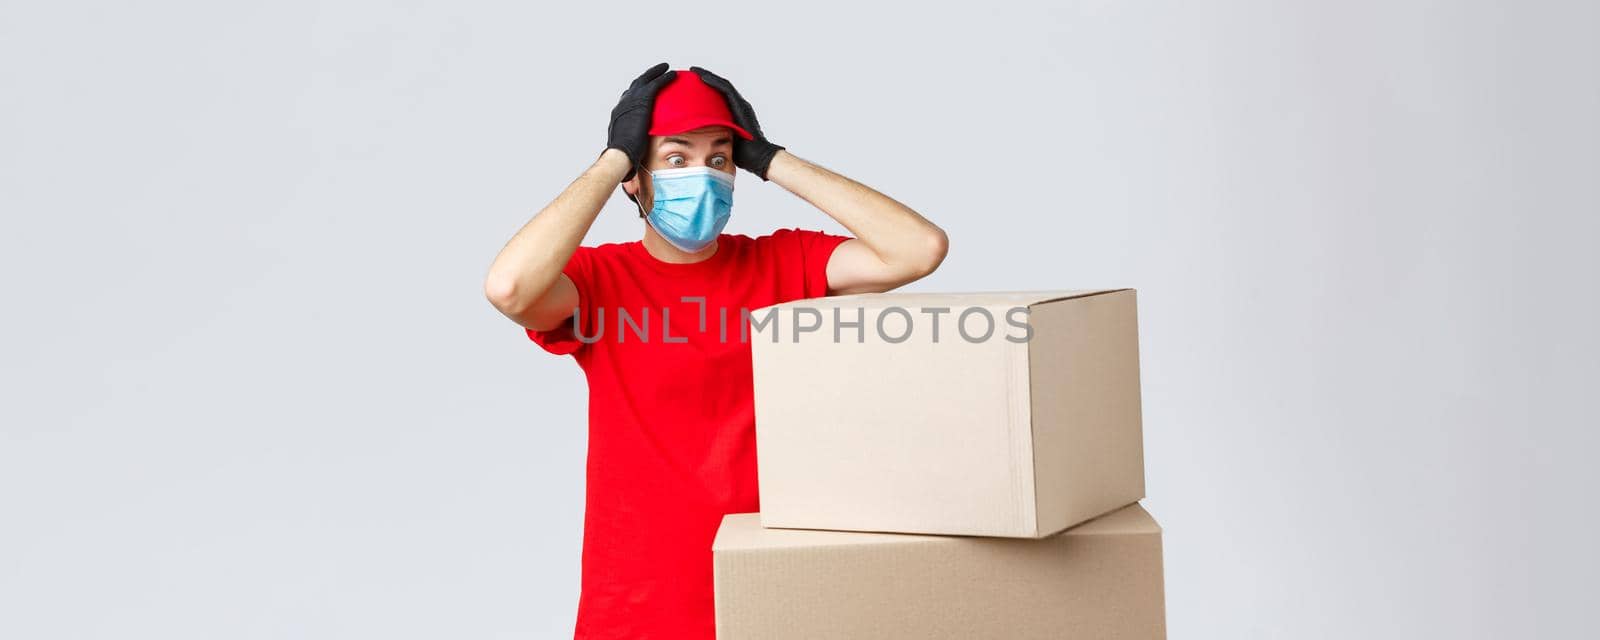 Packages and parcels delivery, covid-19 quarantine and transfer orders. Concerned and troubled courier in red uniform, face mask and gloves, grab head and gasping shocked staring at boxes by Benzoix